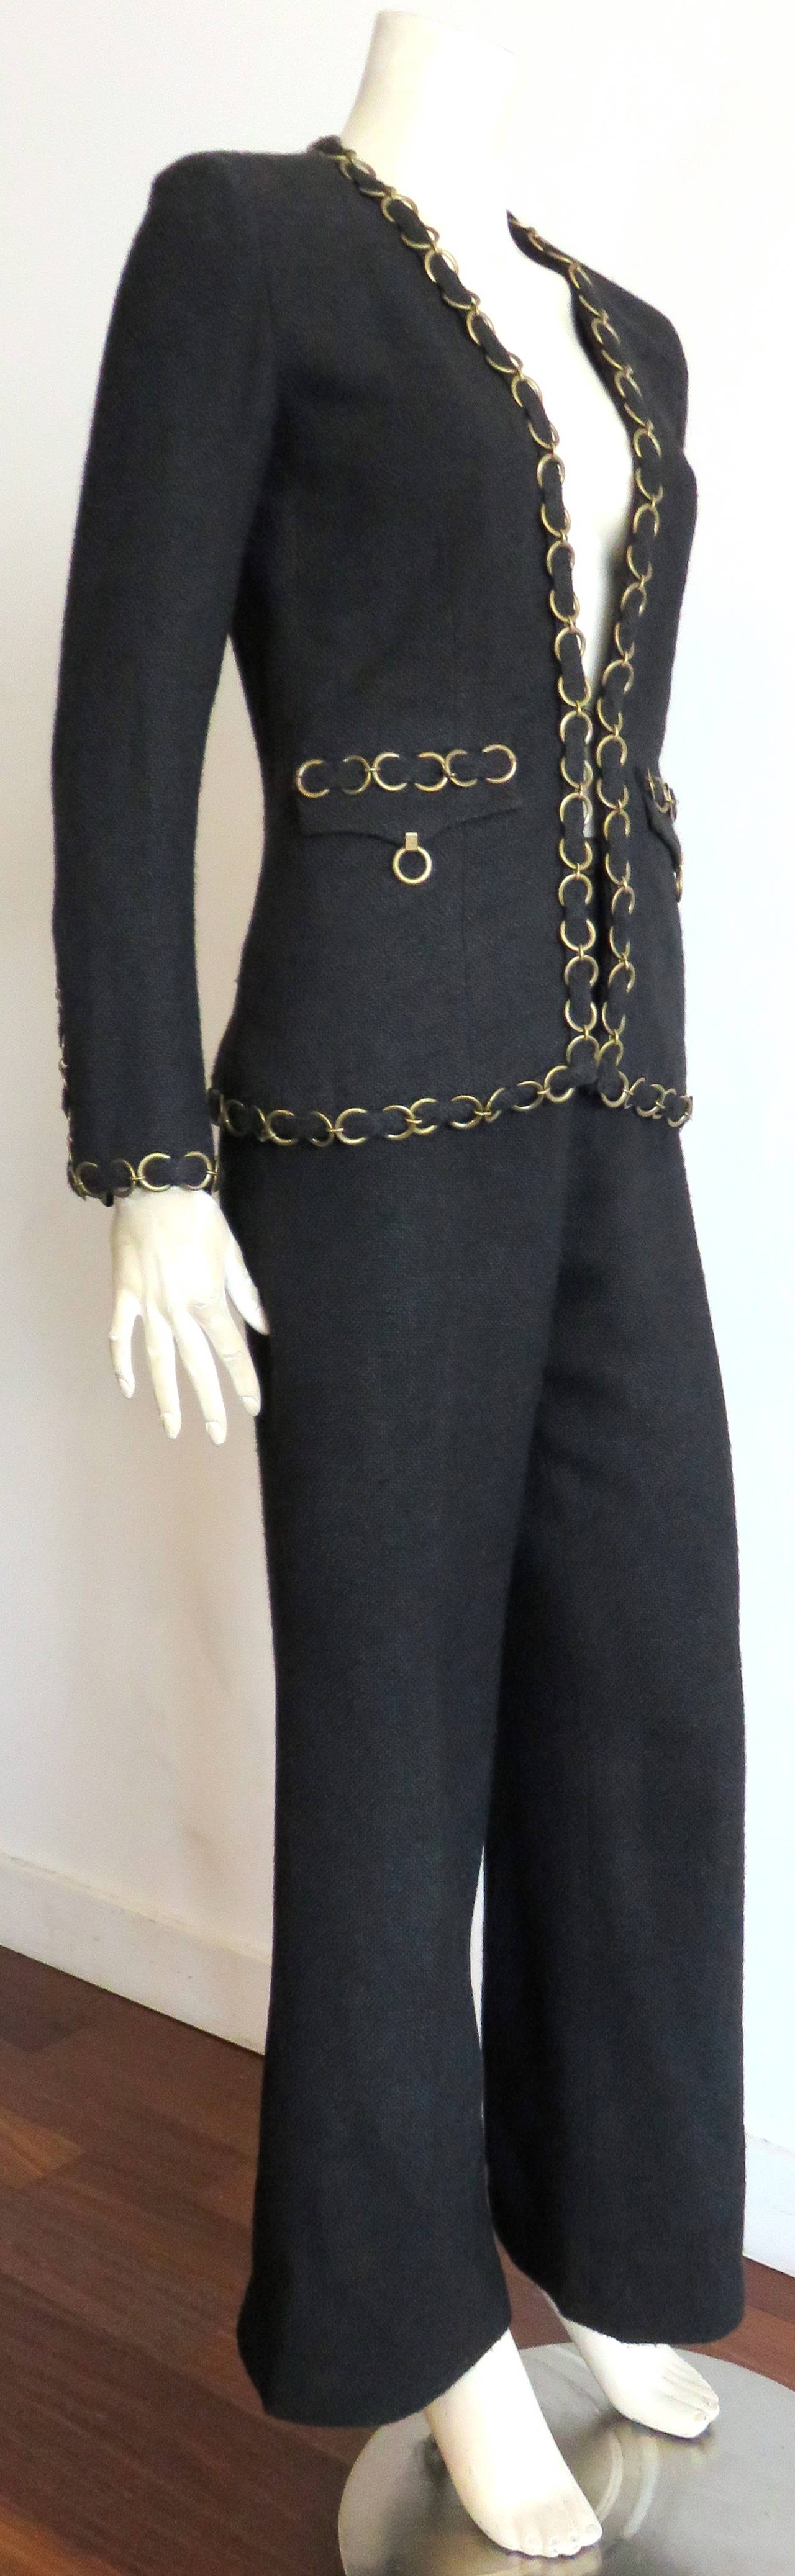 CHANEL PARIS Brass ring-chain trim pant suit In Excellent Condition For Sale In Newport Beach, CA